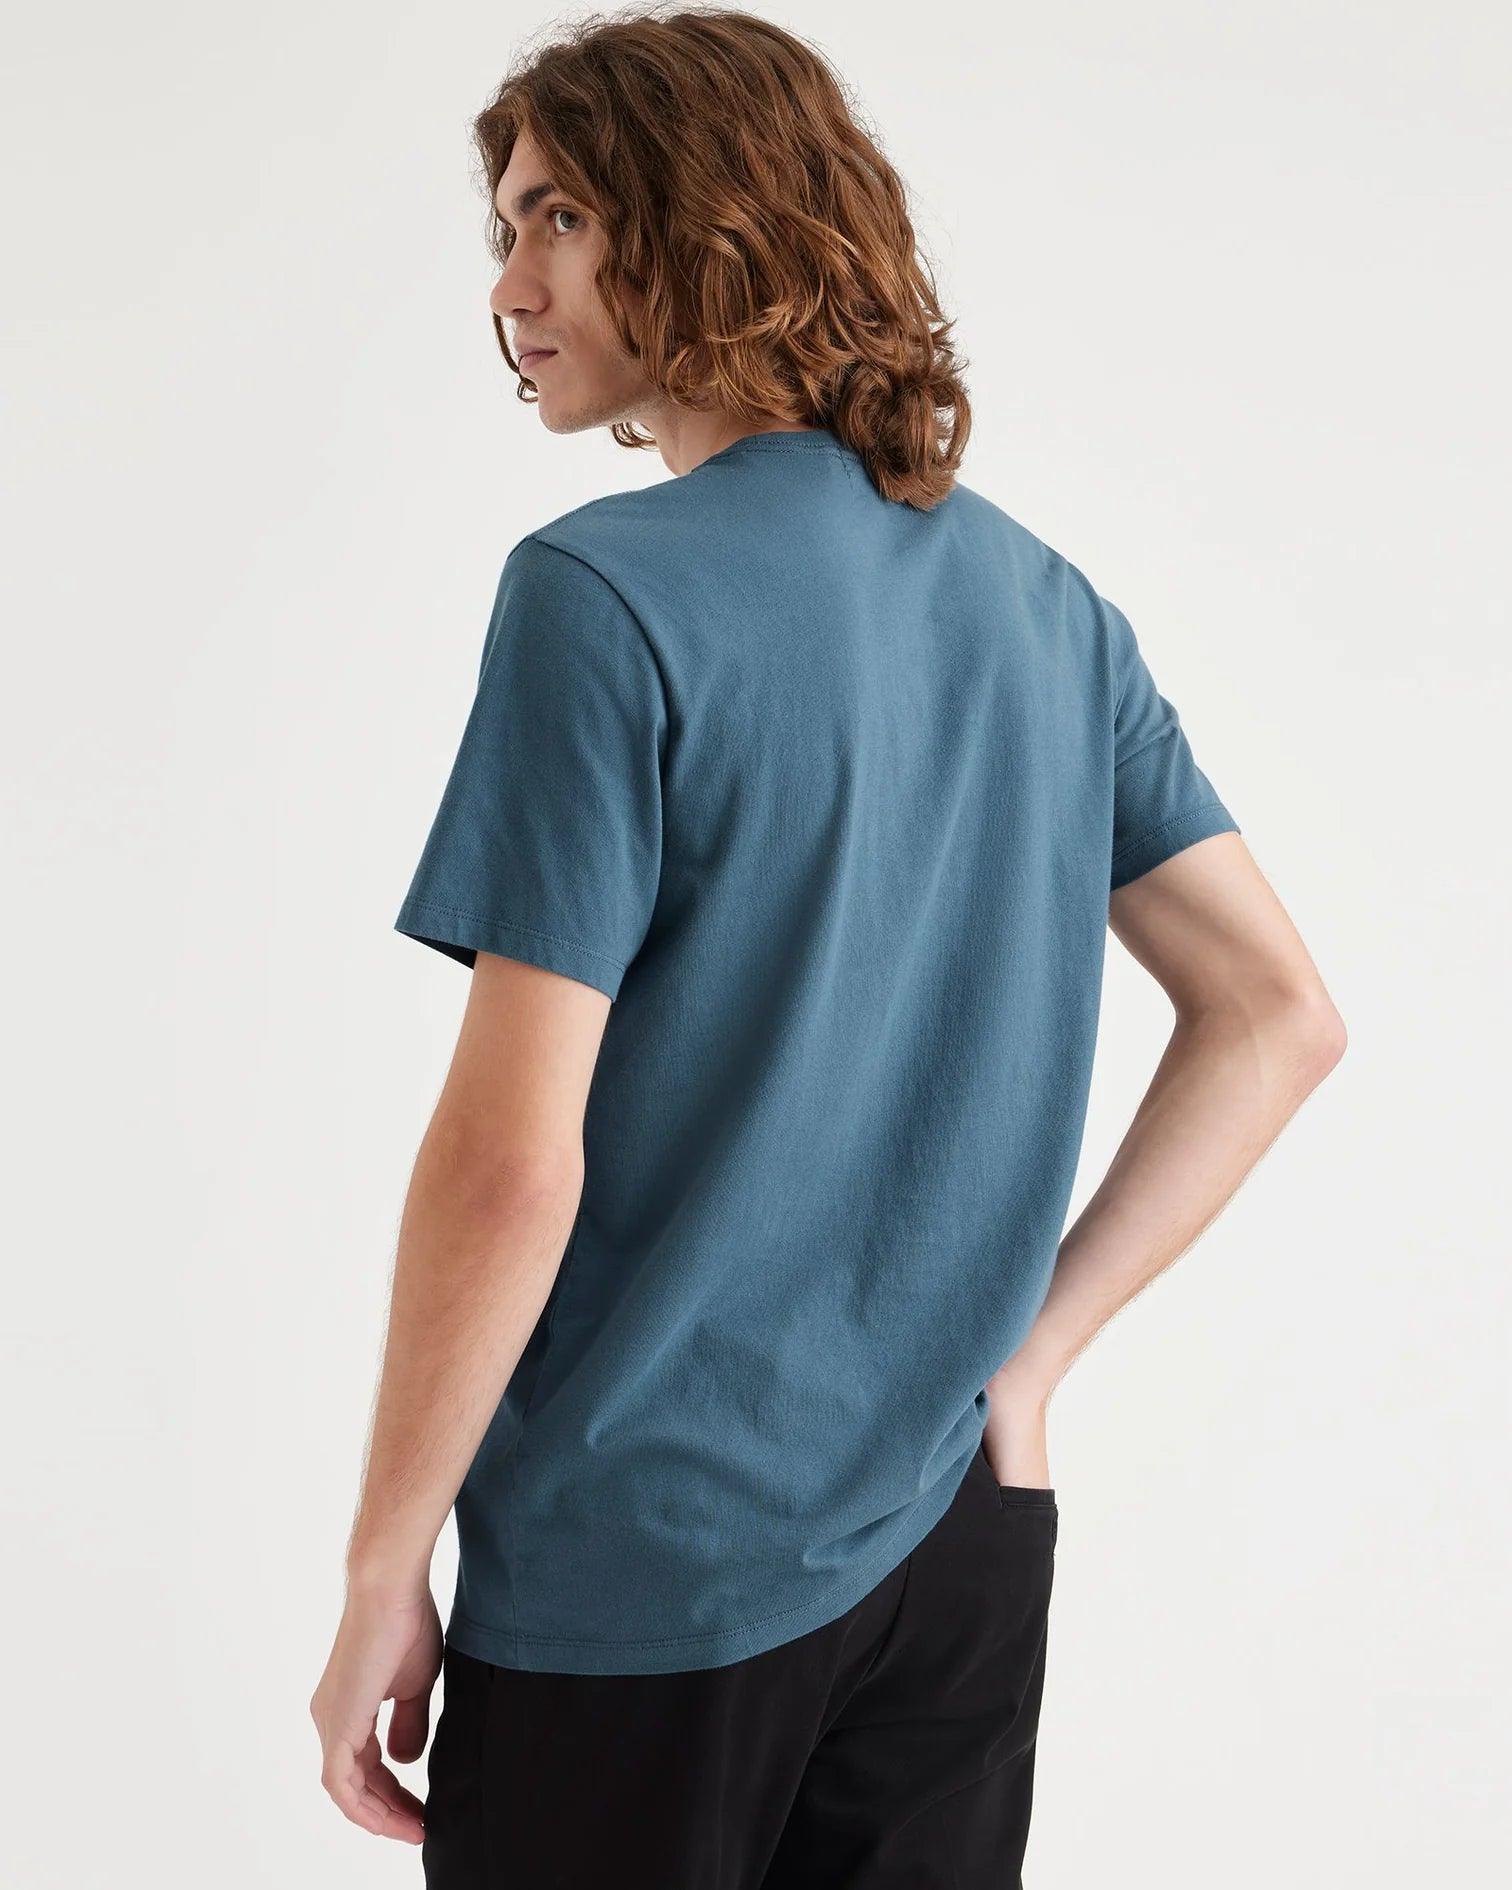 Camiseta Dockers® City By The Bay Indian Teal Blue - ECRU